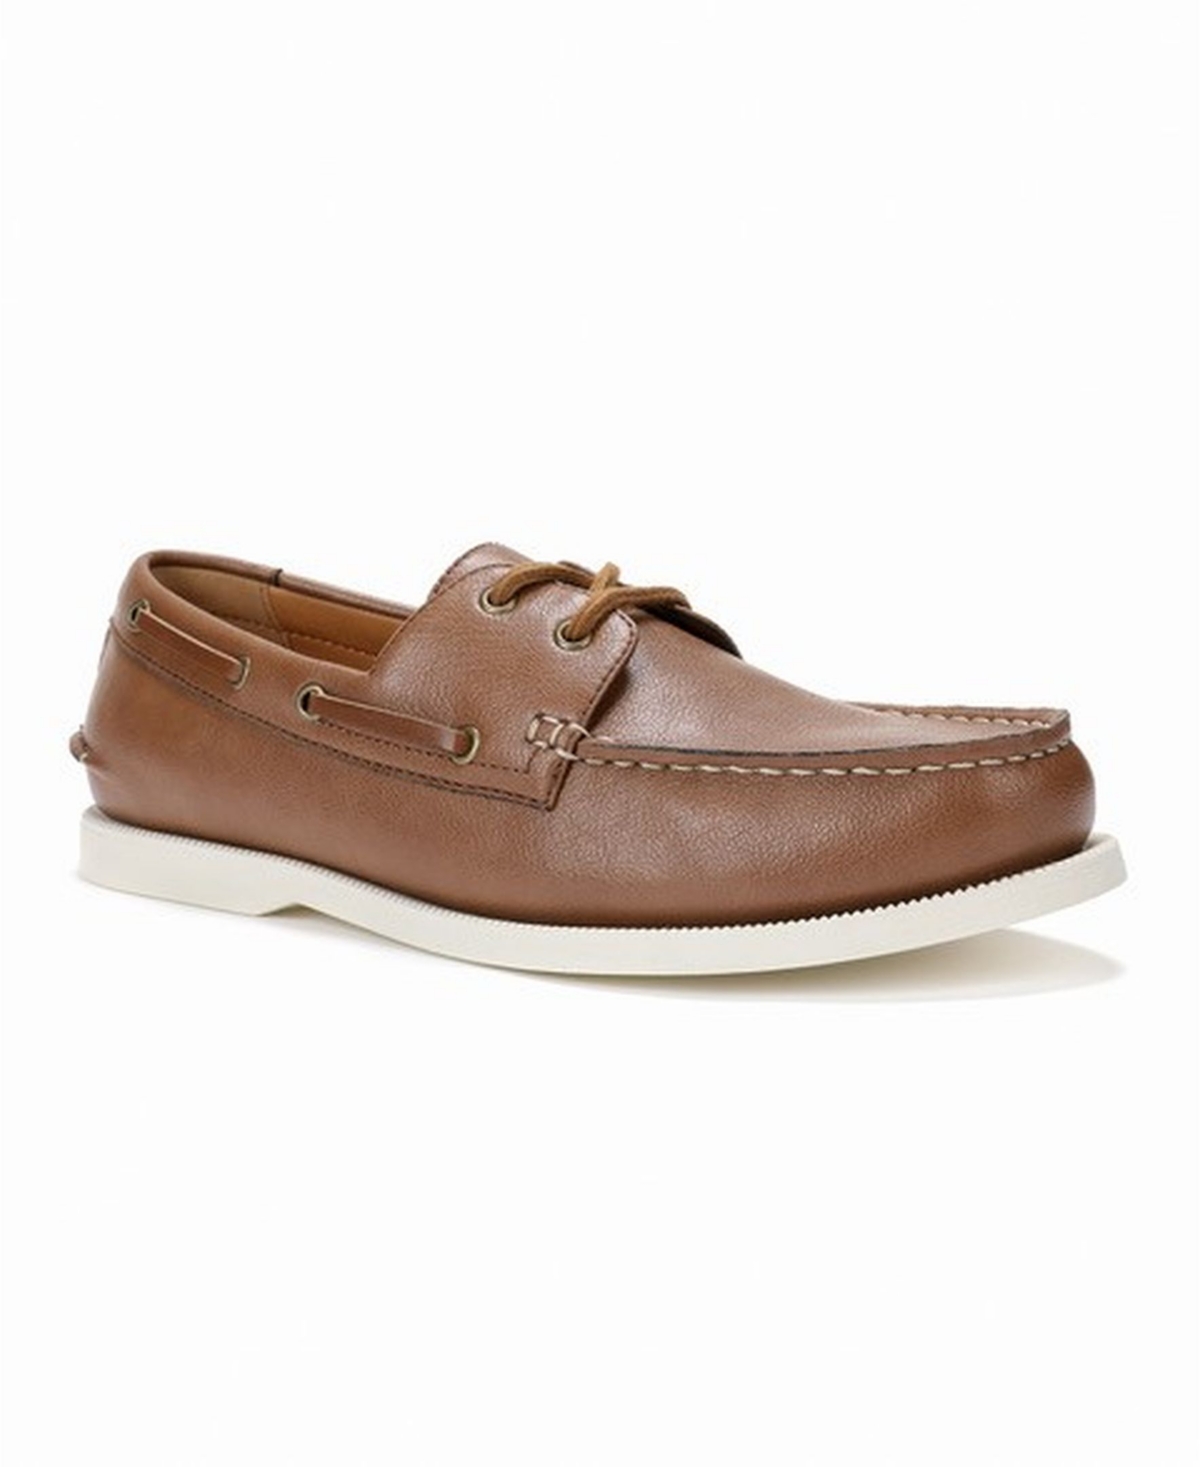 Club Room Men's Boat Shoes, Created For Macy's Men's Shoes In Tan